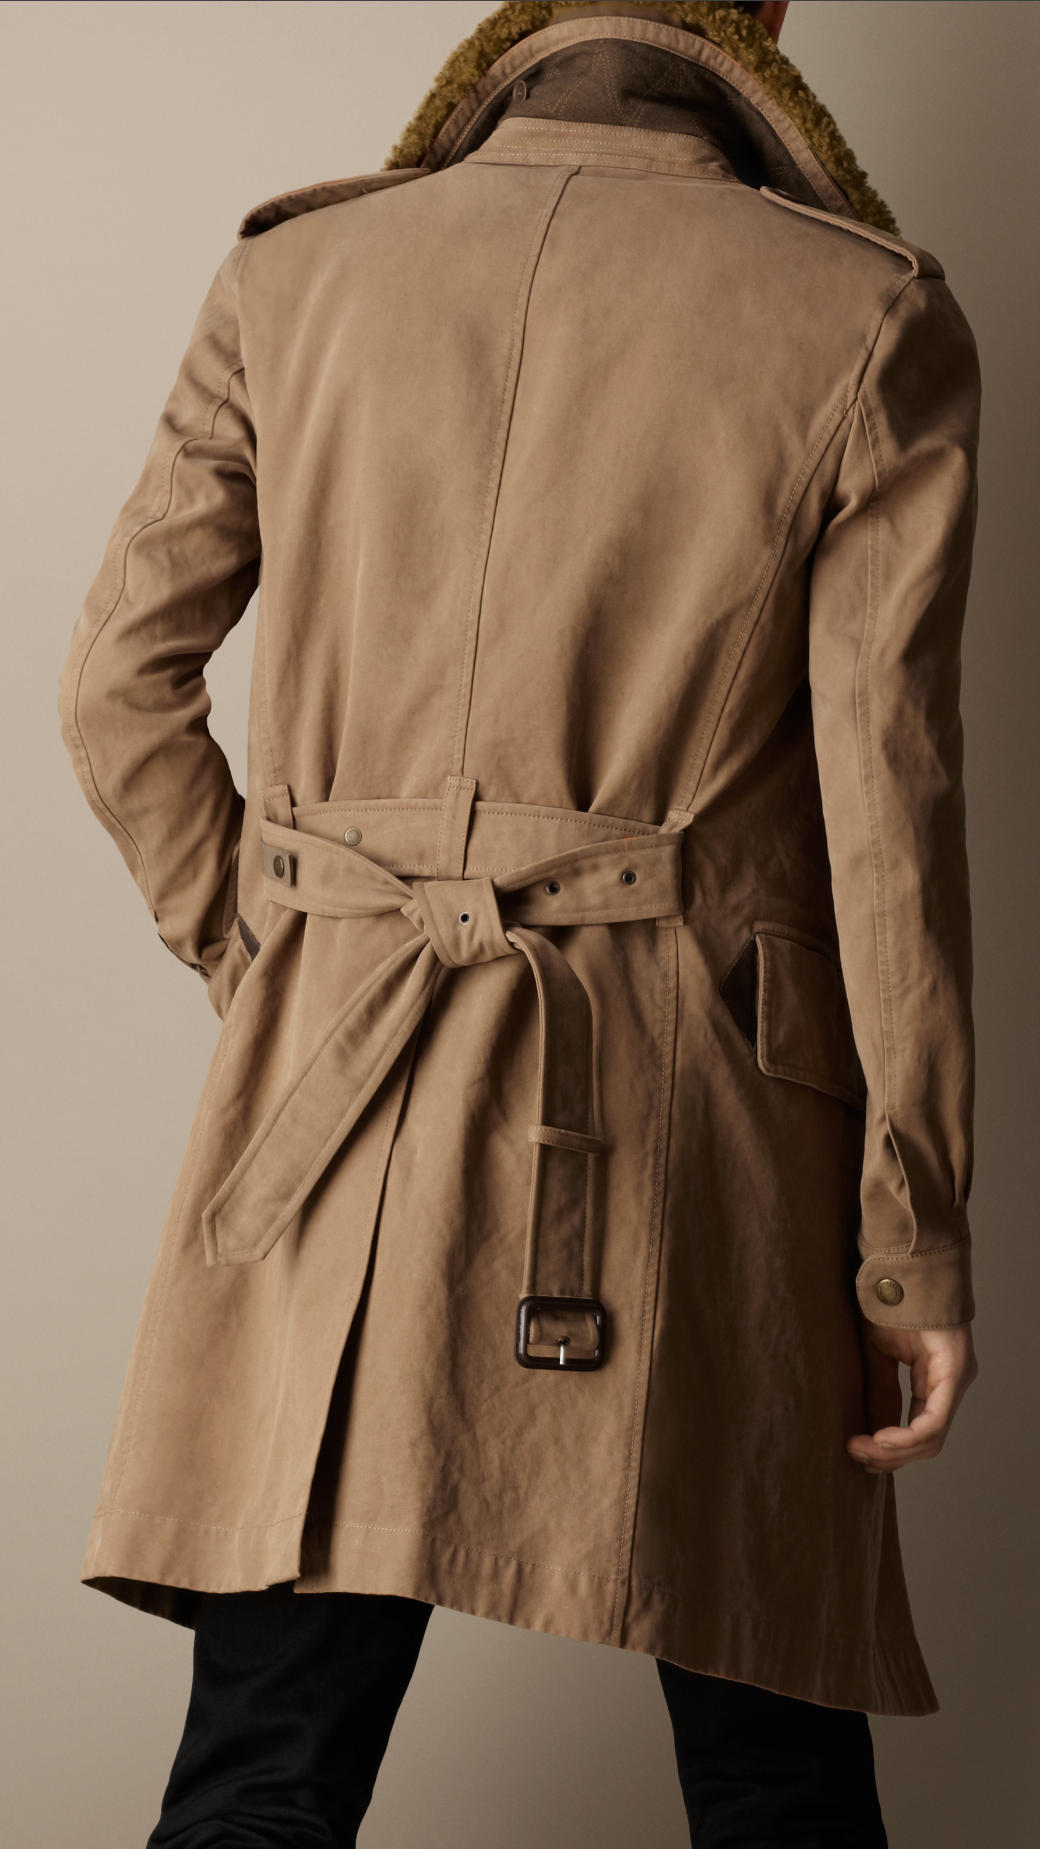 Burberry Shearling Collar Heritage Trench Coat in Brown for Men - Lyst